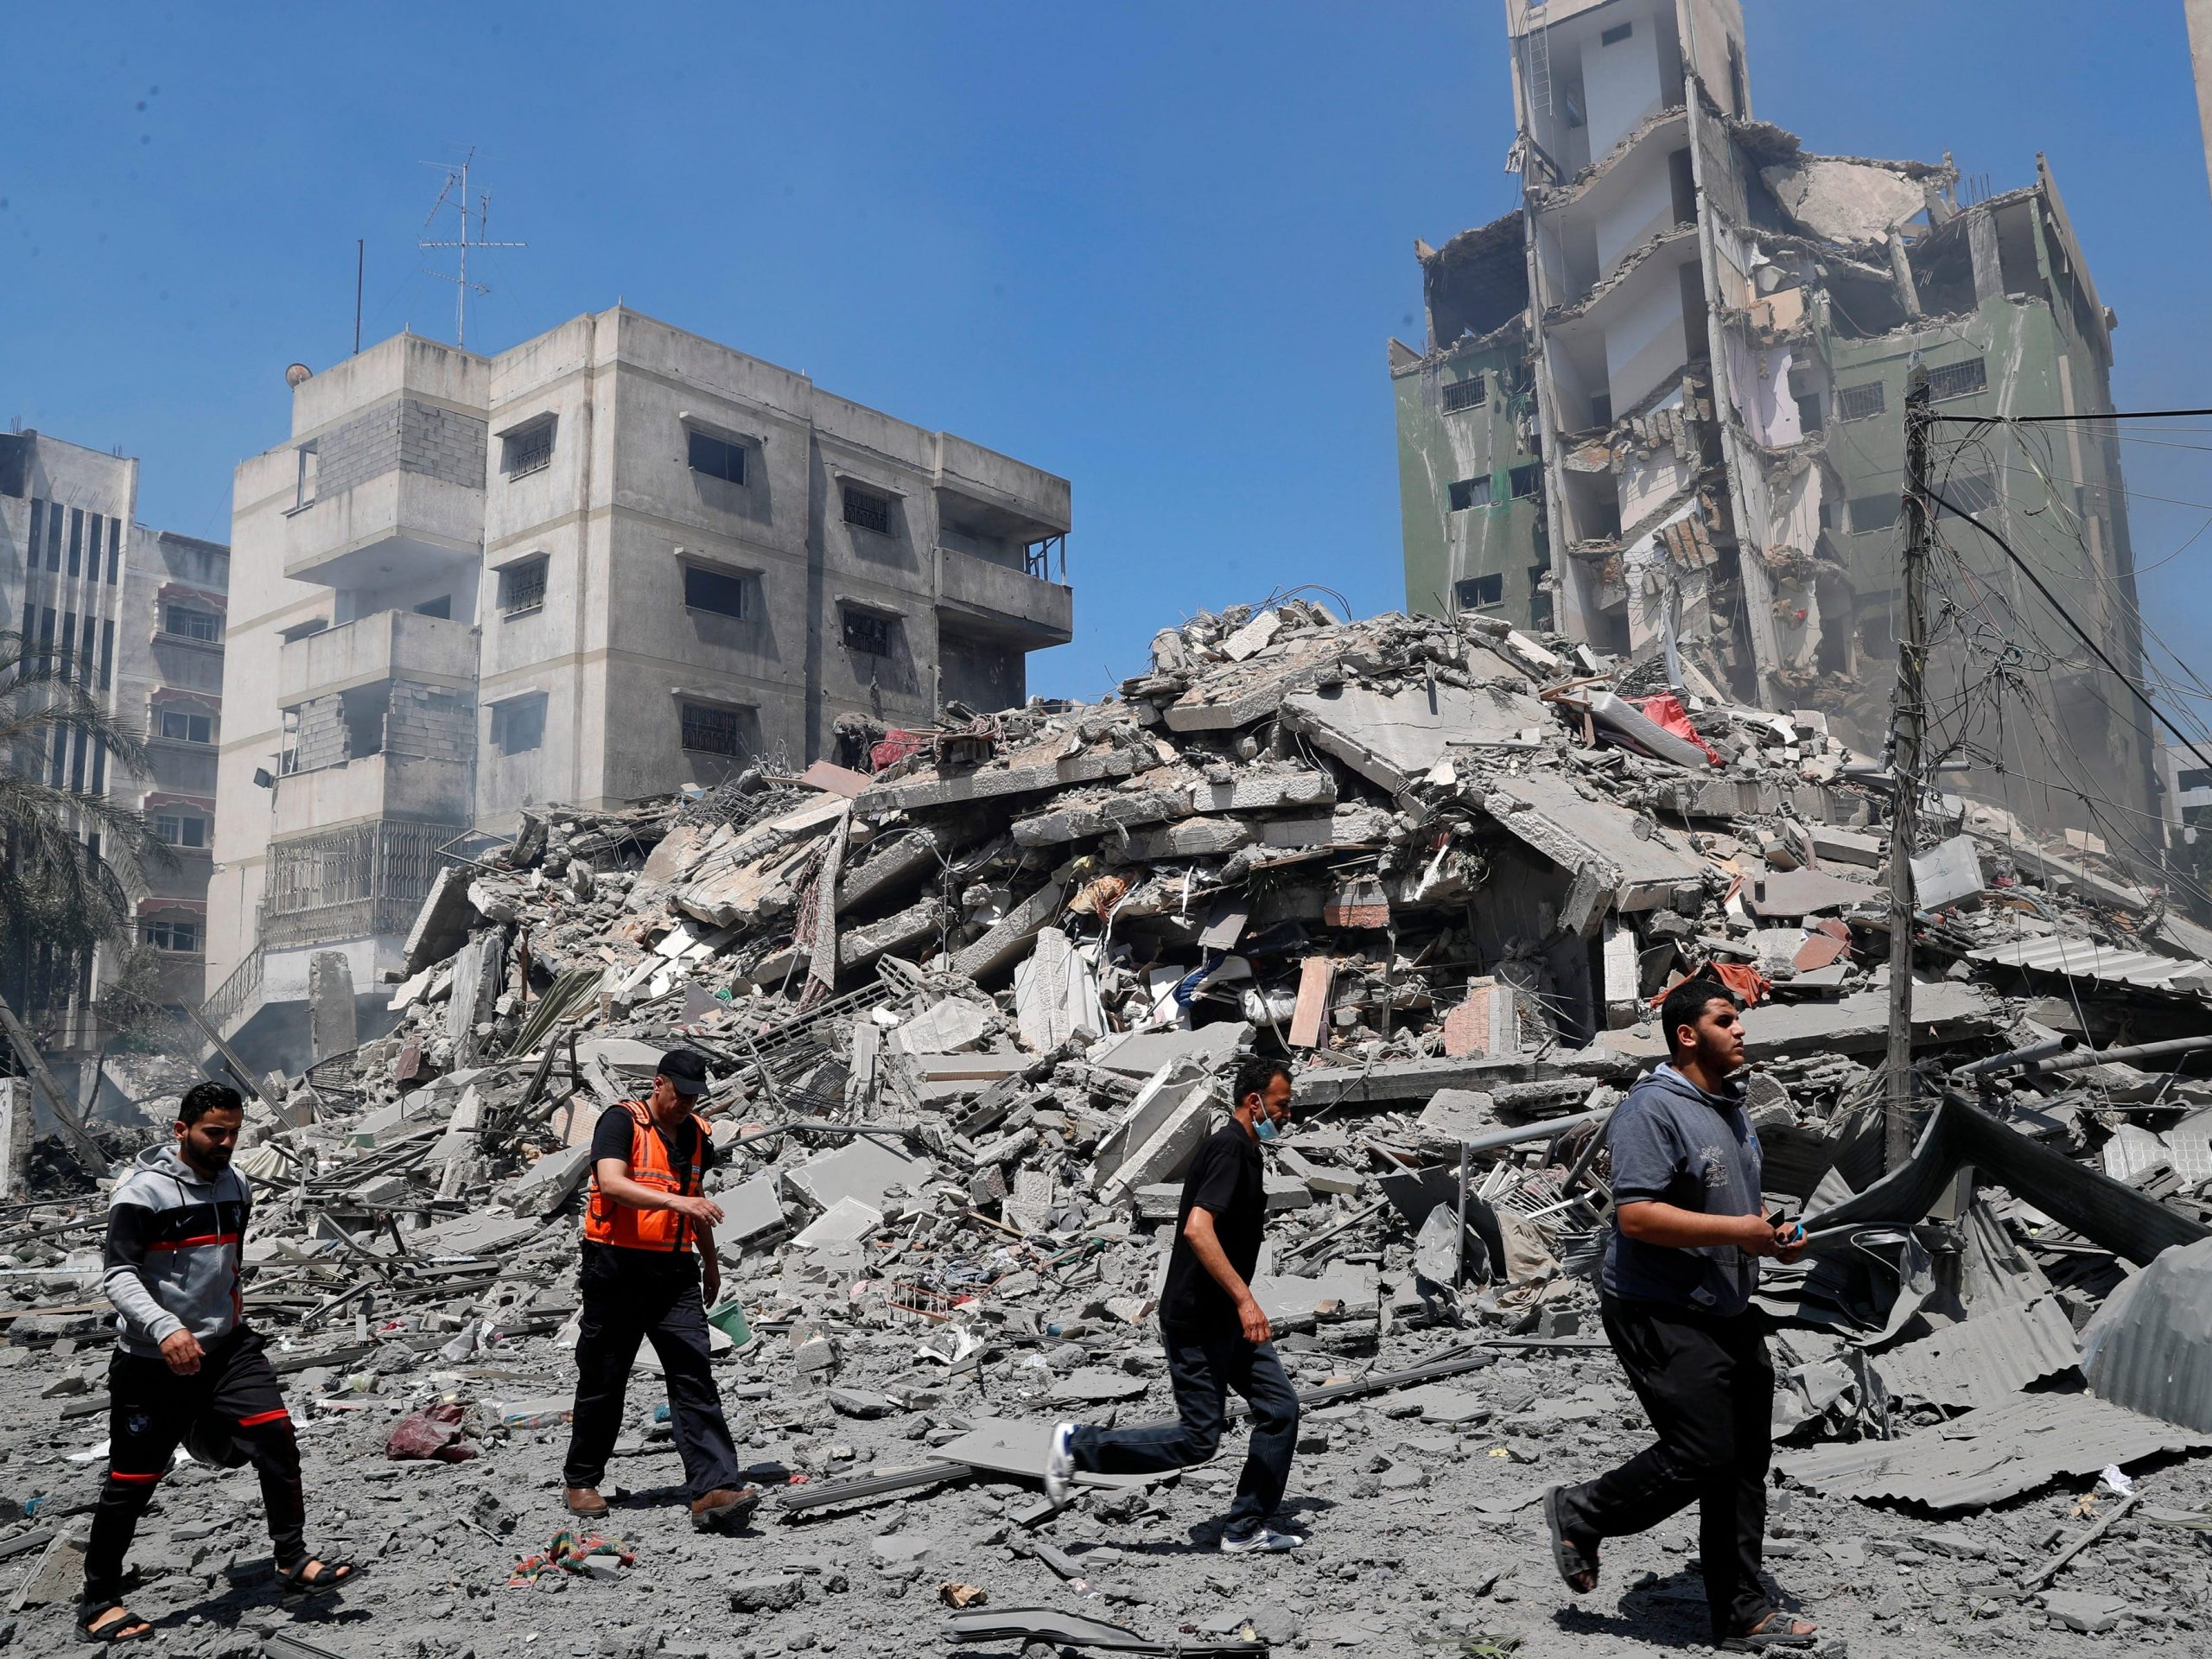 People inspect the rubble of a building in Gaza that was destroyed by an Israeli airstrike